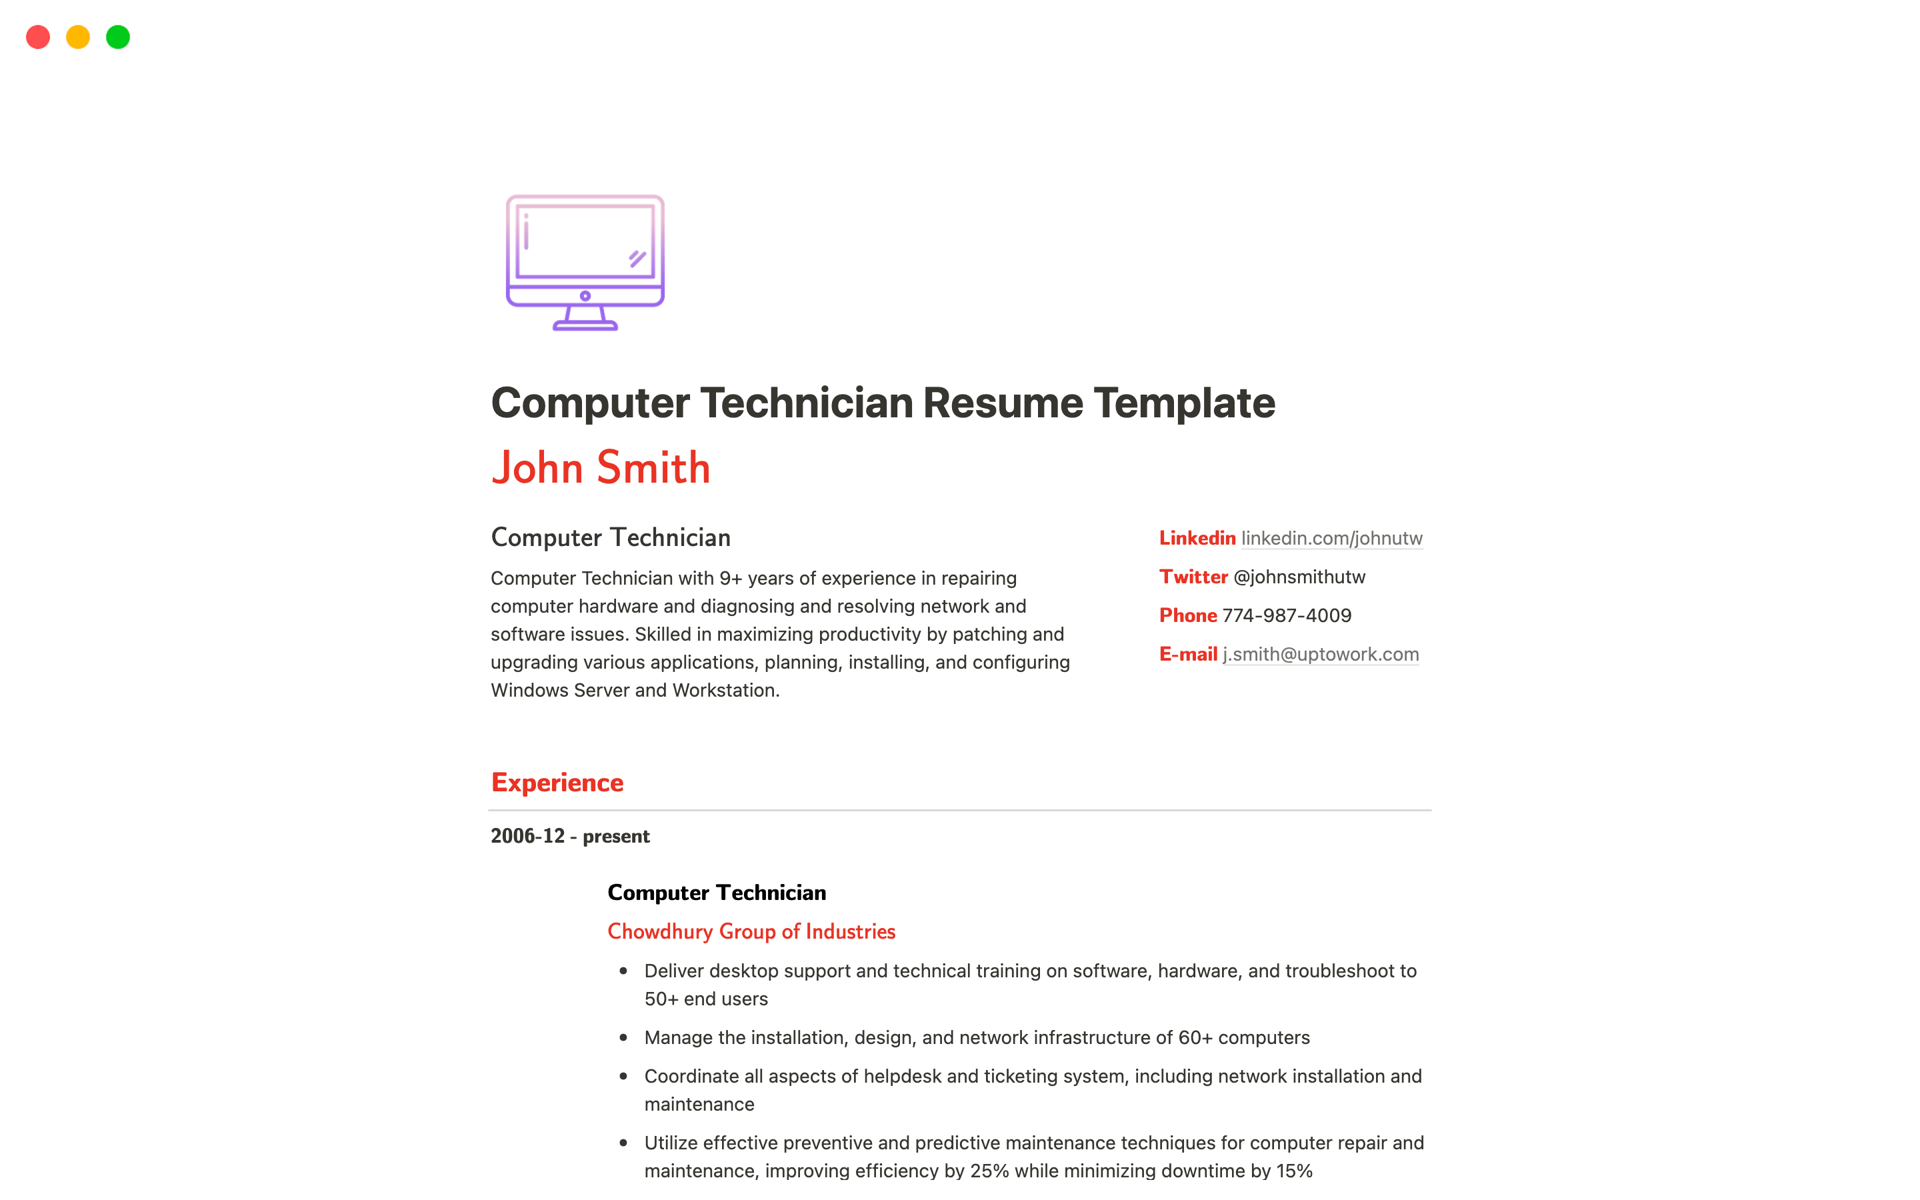 A template preview for Computer Technician Resume